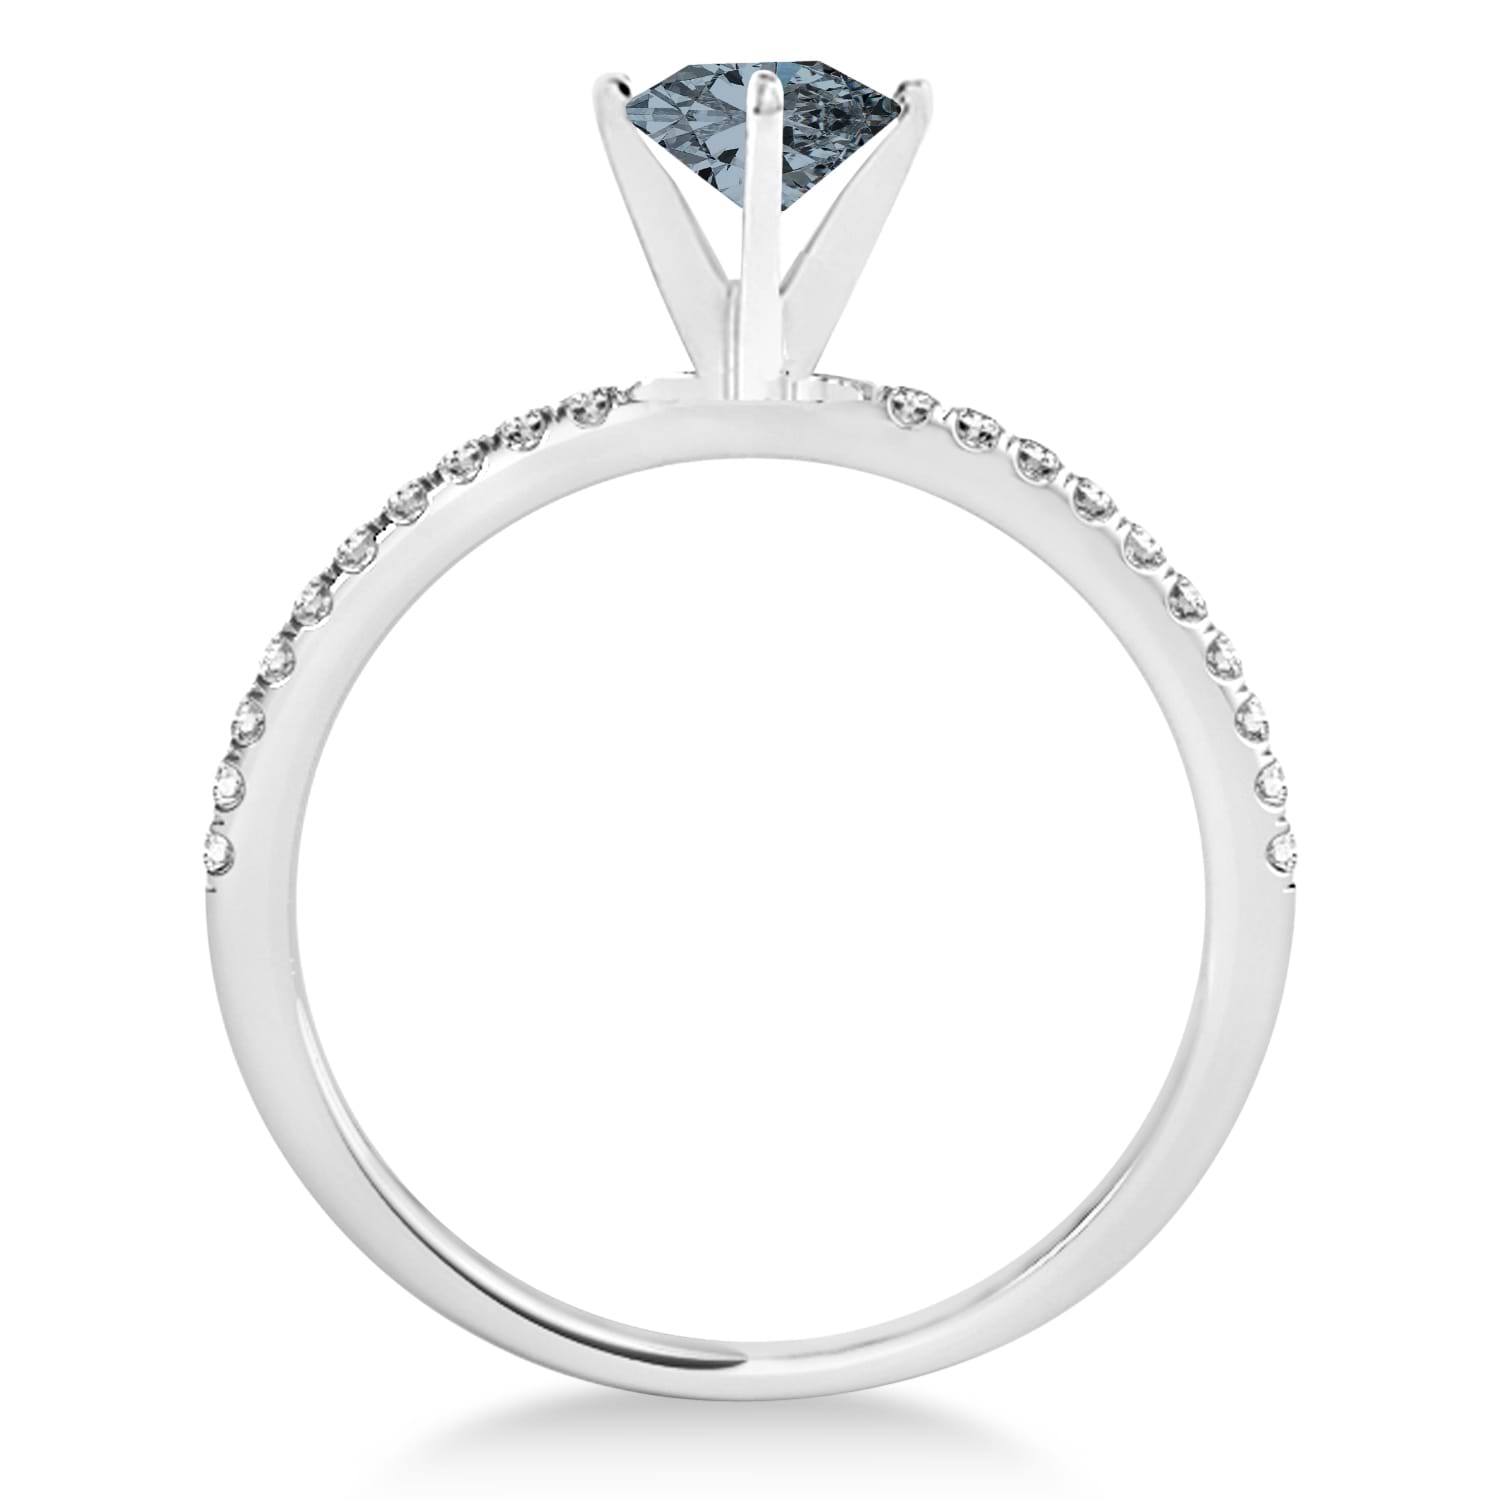 Gray Spinel & Diamond Accented Oval Shape Engagement Ring 14k White Gold (3.00ct)